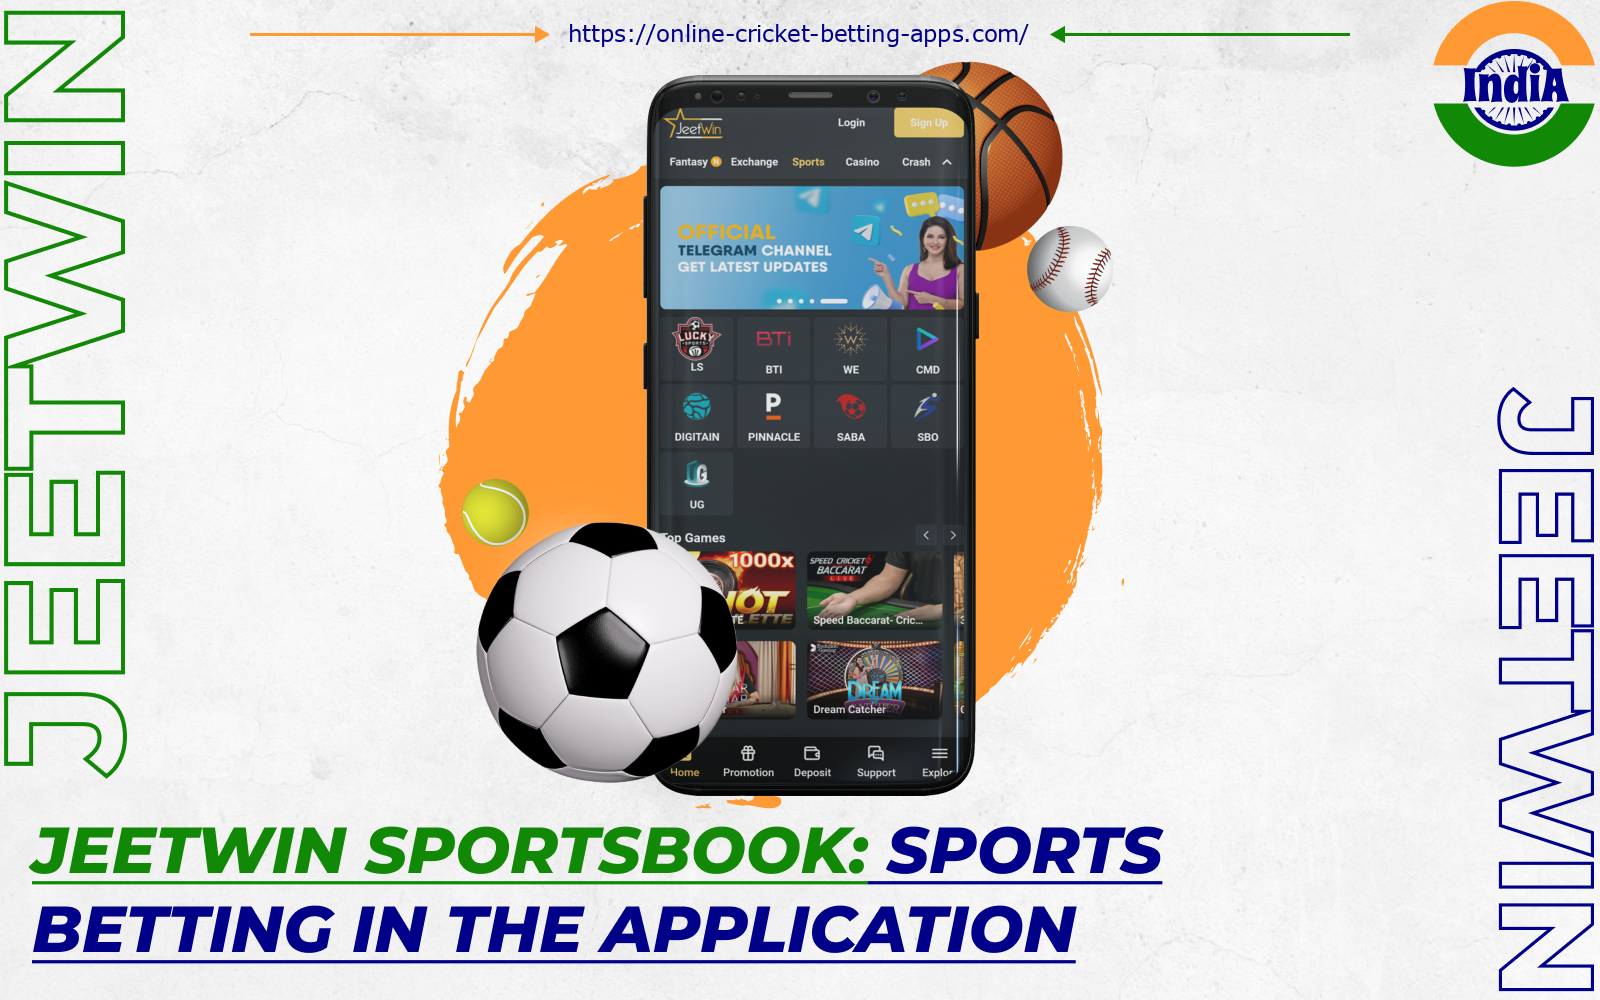 Through the Jeetwin India app, you can bet on any global sporting event, both pre-match and real-time